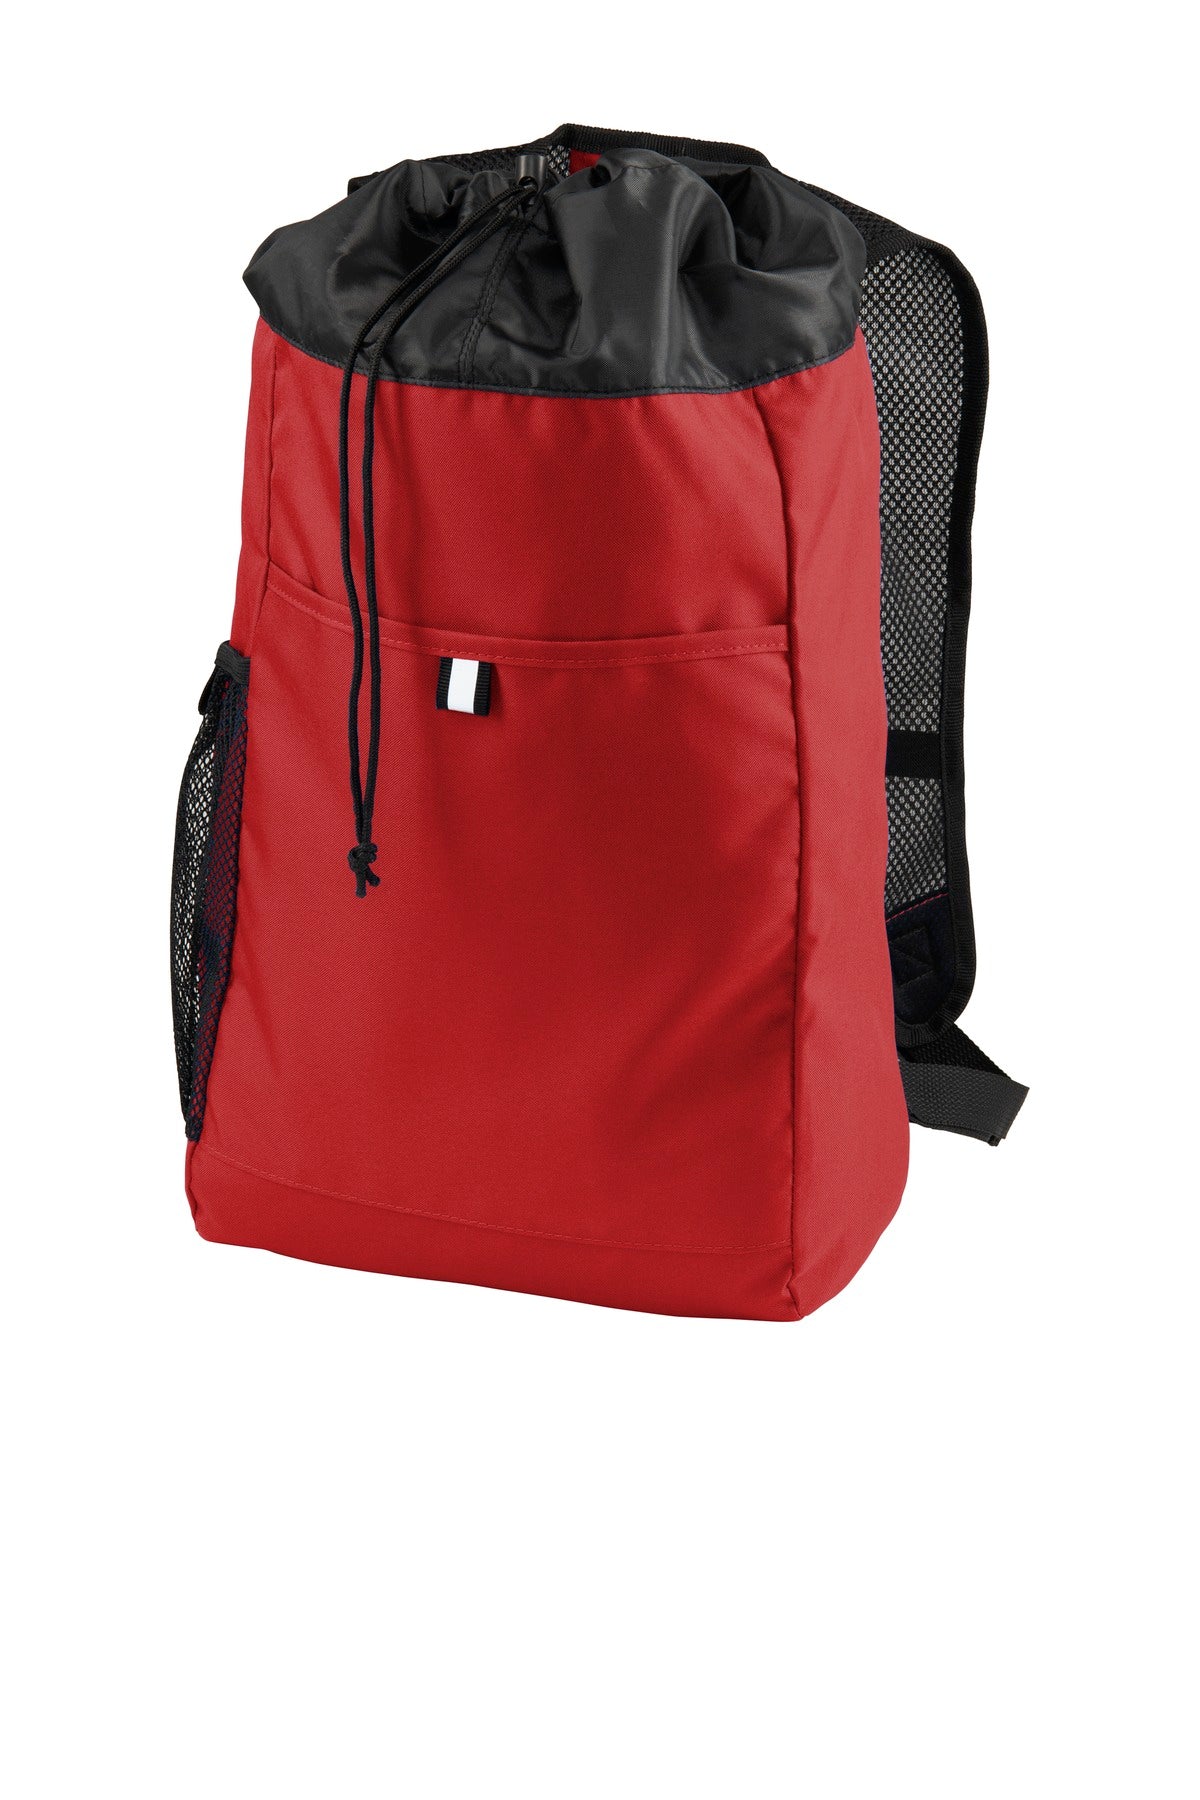 Bags Chili Red/ Black OSFA Port Authority